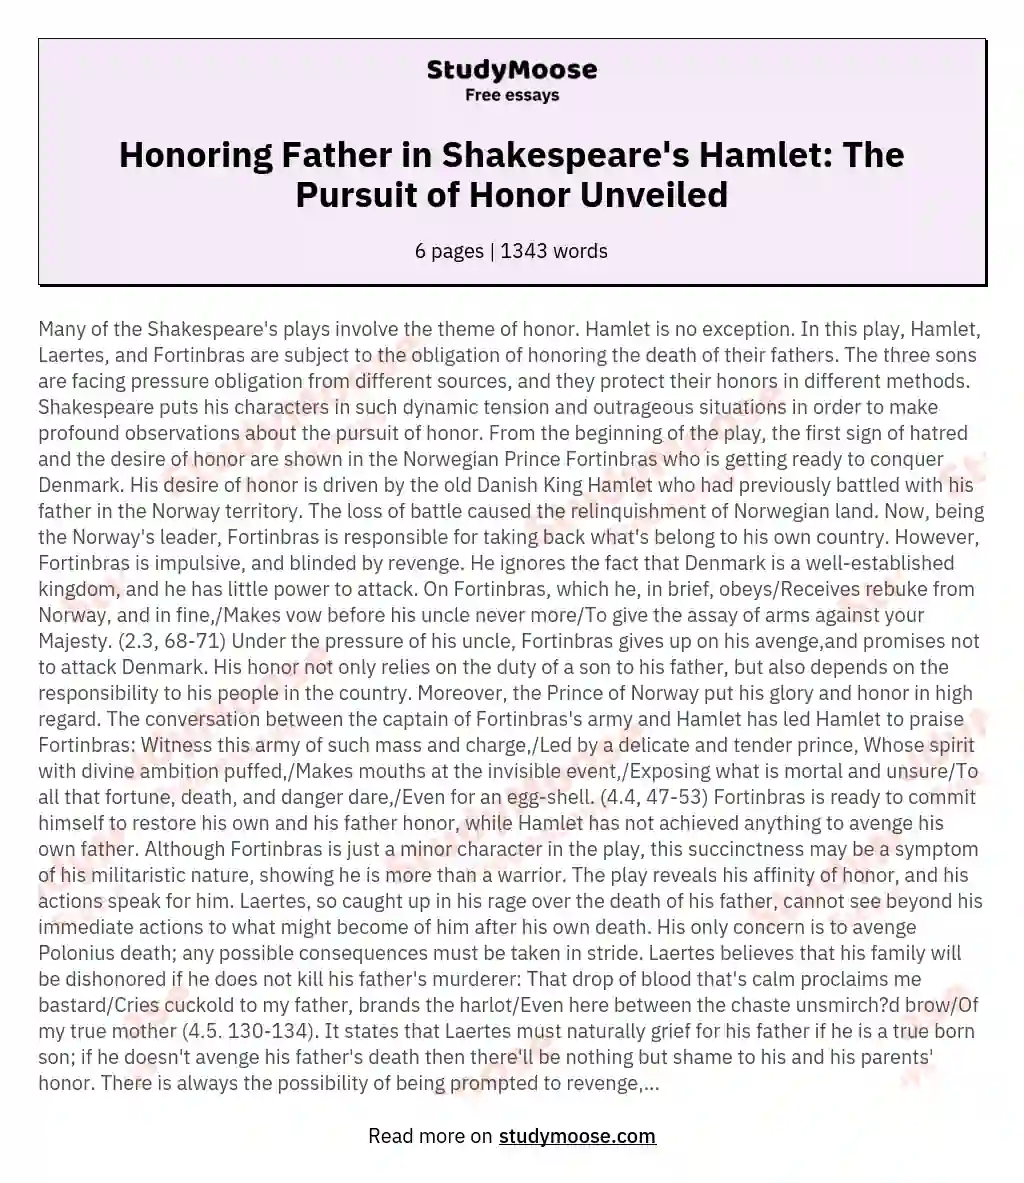 Honoring Father in Shakespeare's Hamlet: The Pursuit of Honor Unveiled essay